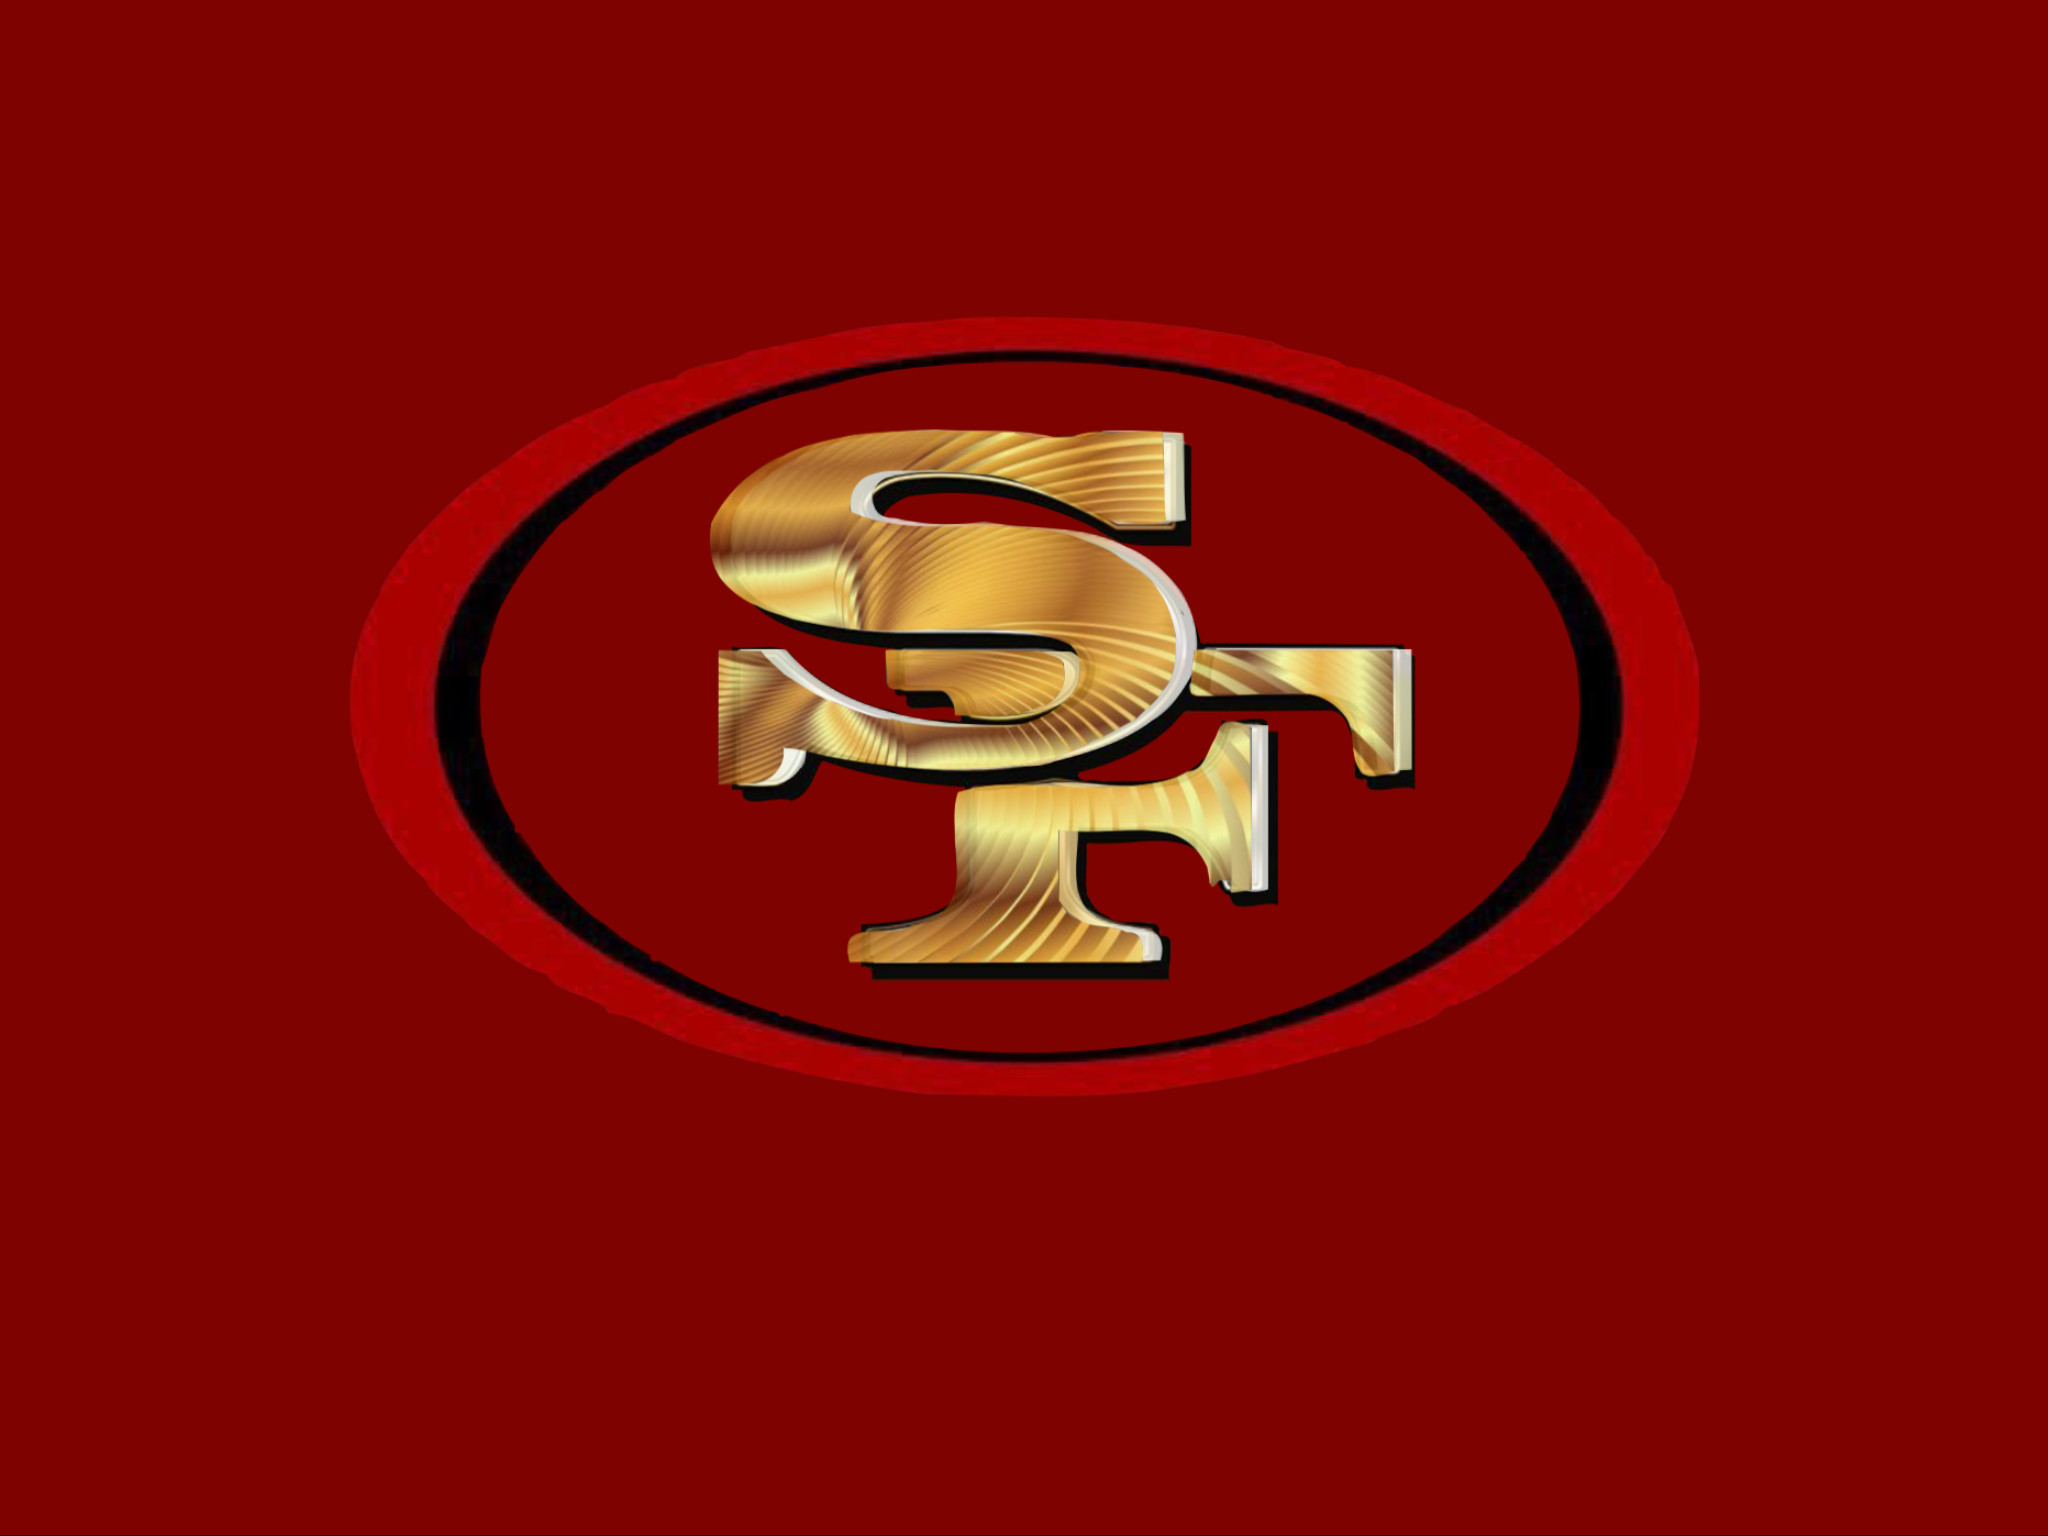 New 49ers Wallpaper (75+ images)